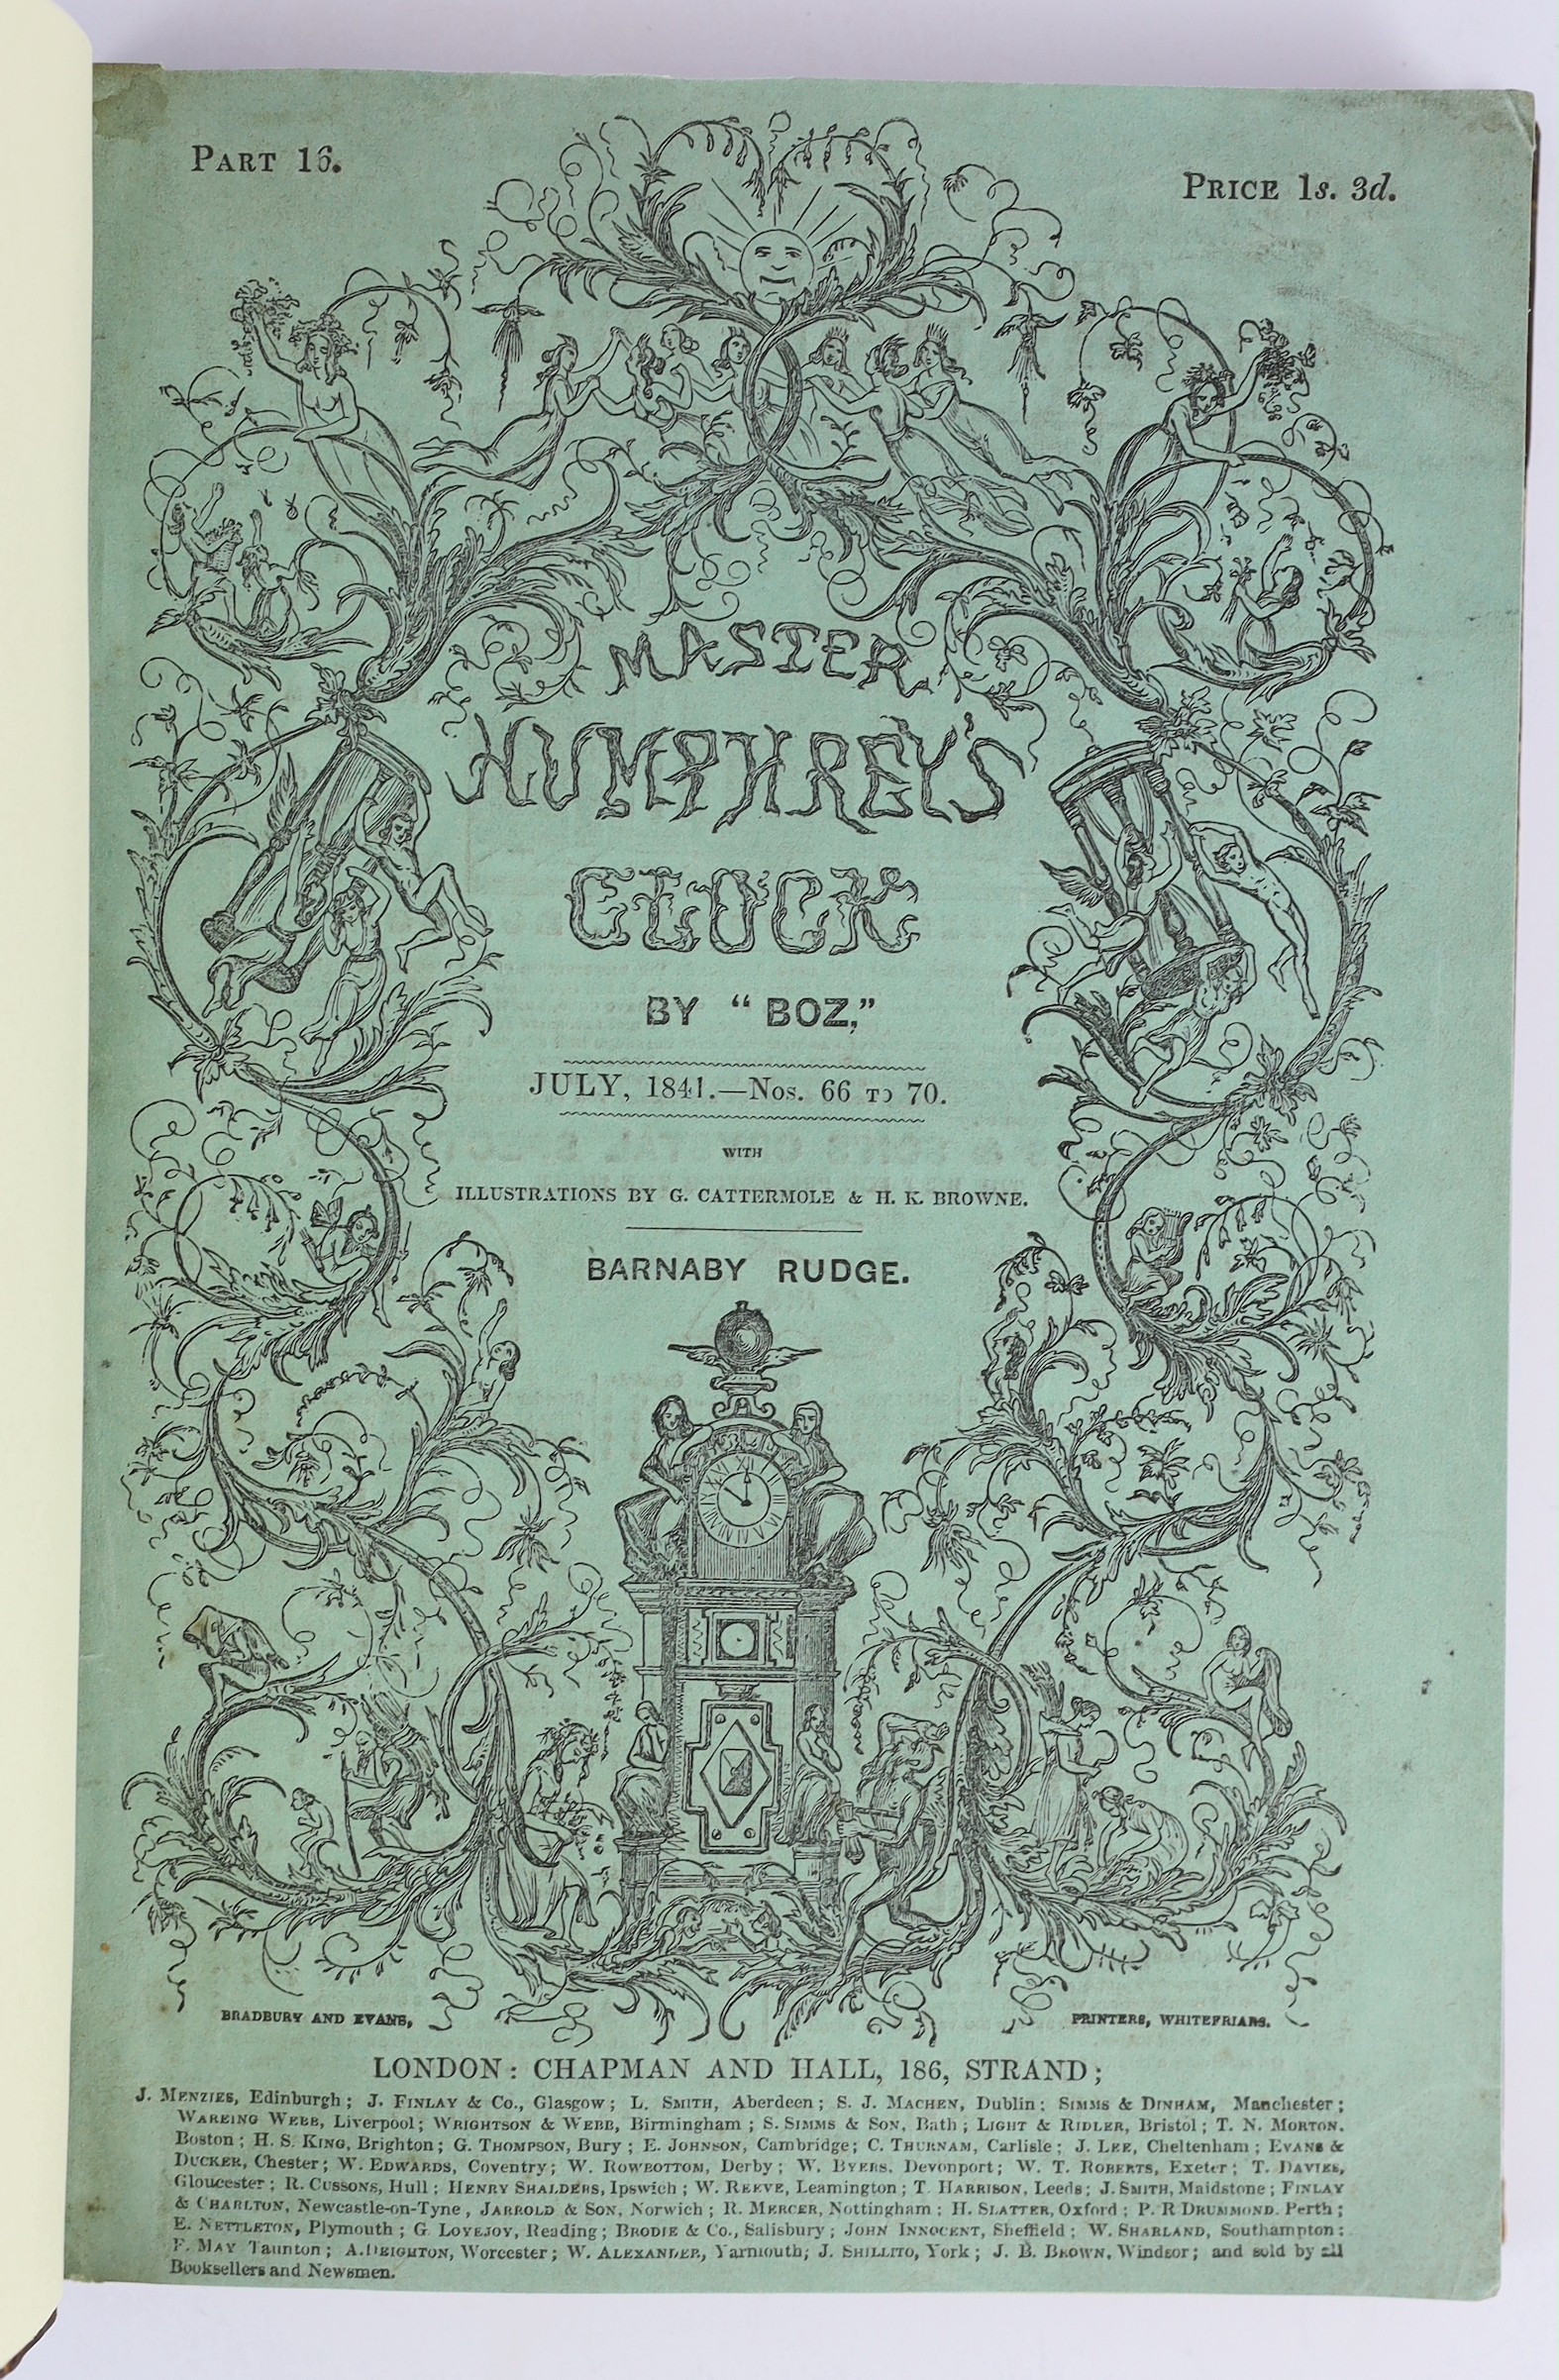 Dickens, Charles - Master Humphrey’s Clock, 1st edition in book form, 3 vols, 8vo, later quarter calf with marbled boards, renewed end papers, illustrated by George Cattermole and Halbot K. Browne (‘’Phiz’’), front page